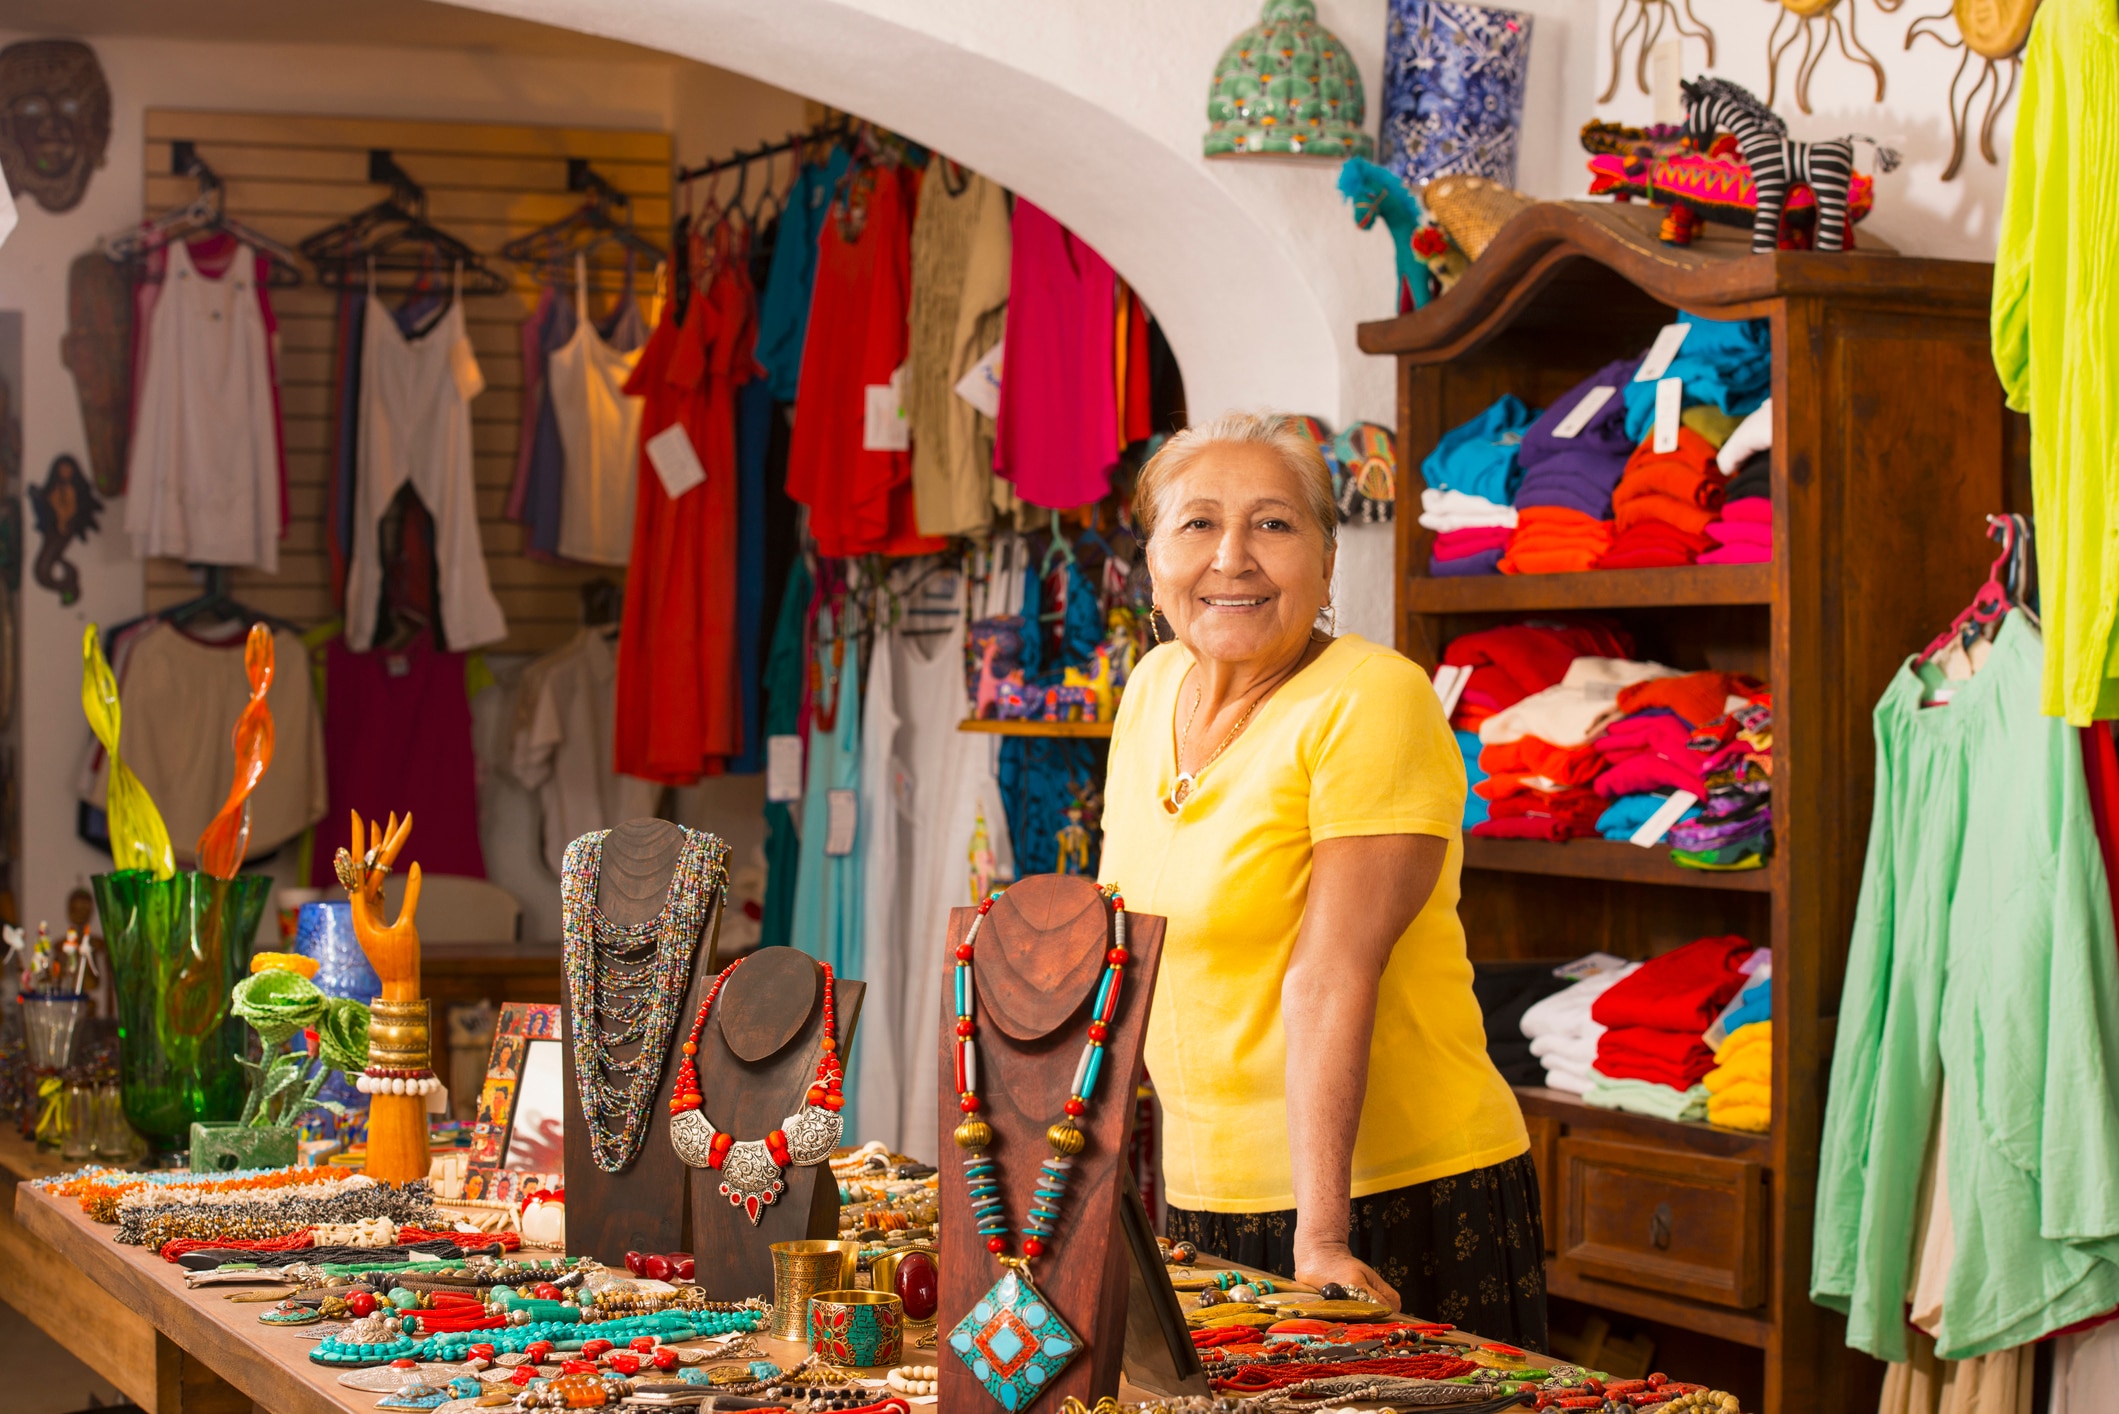 Providing Microfinance Loans to Women in Mexico